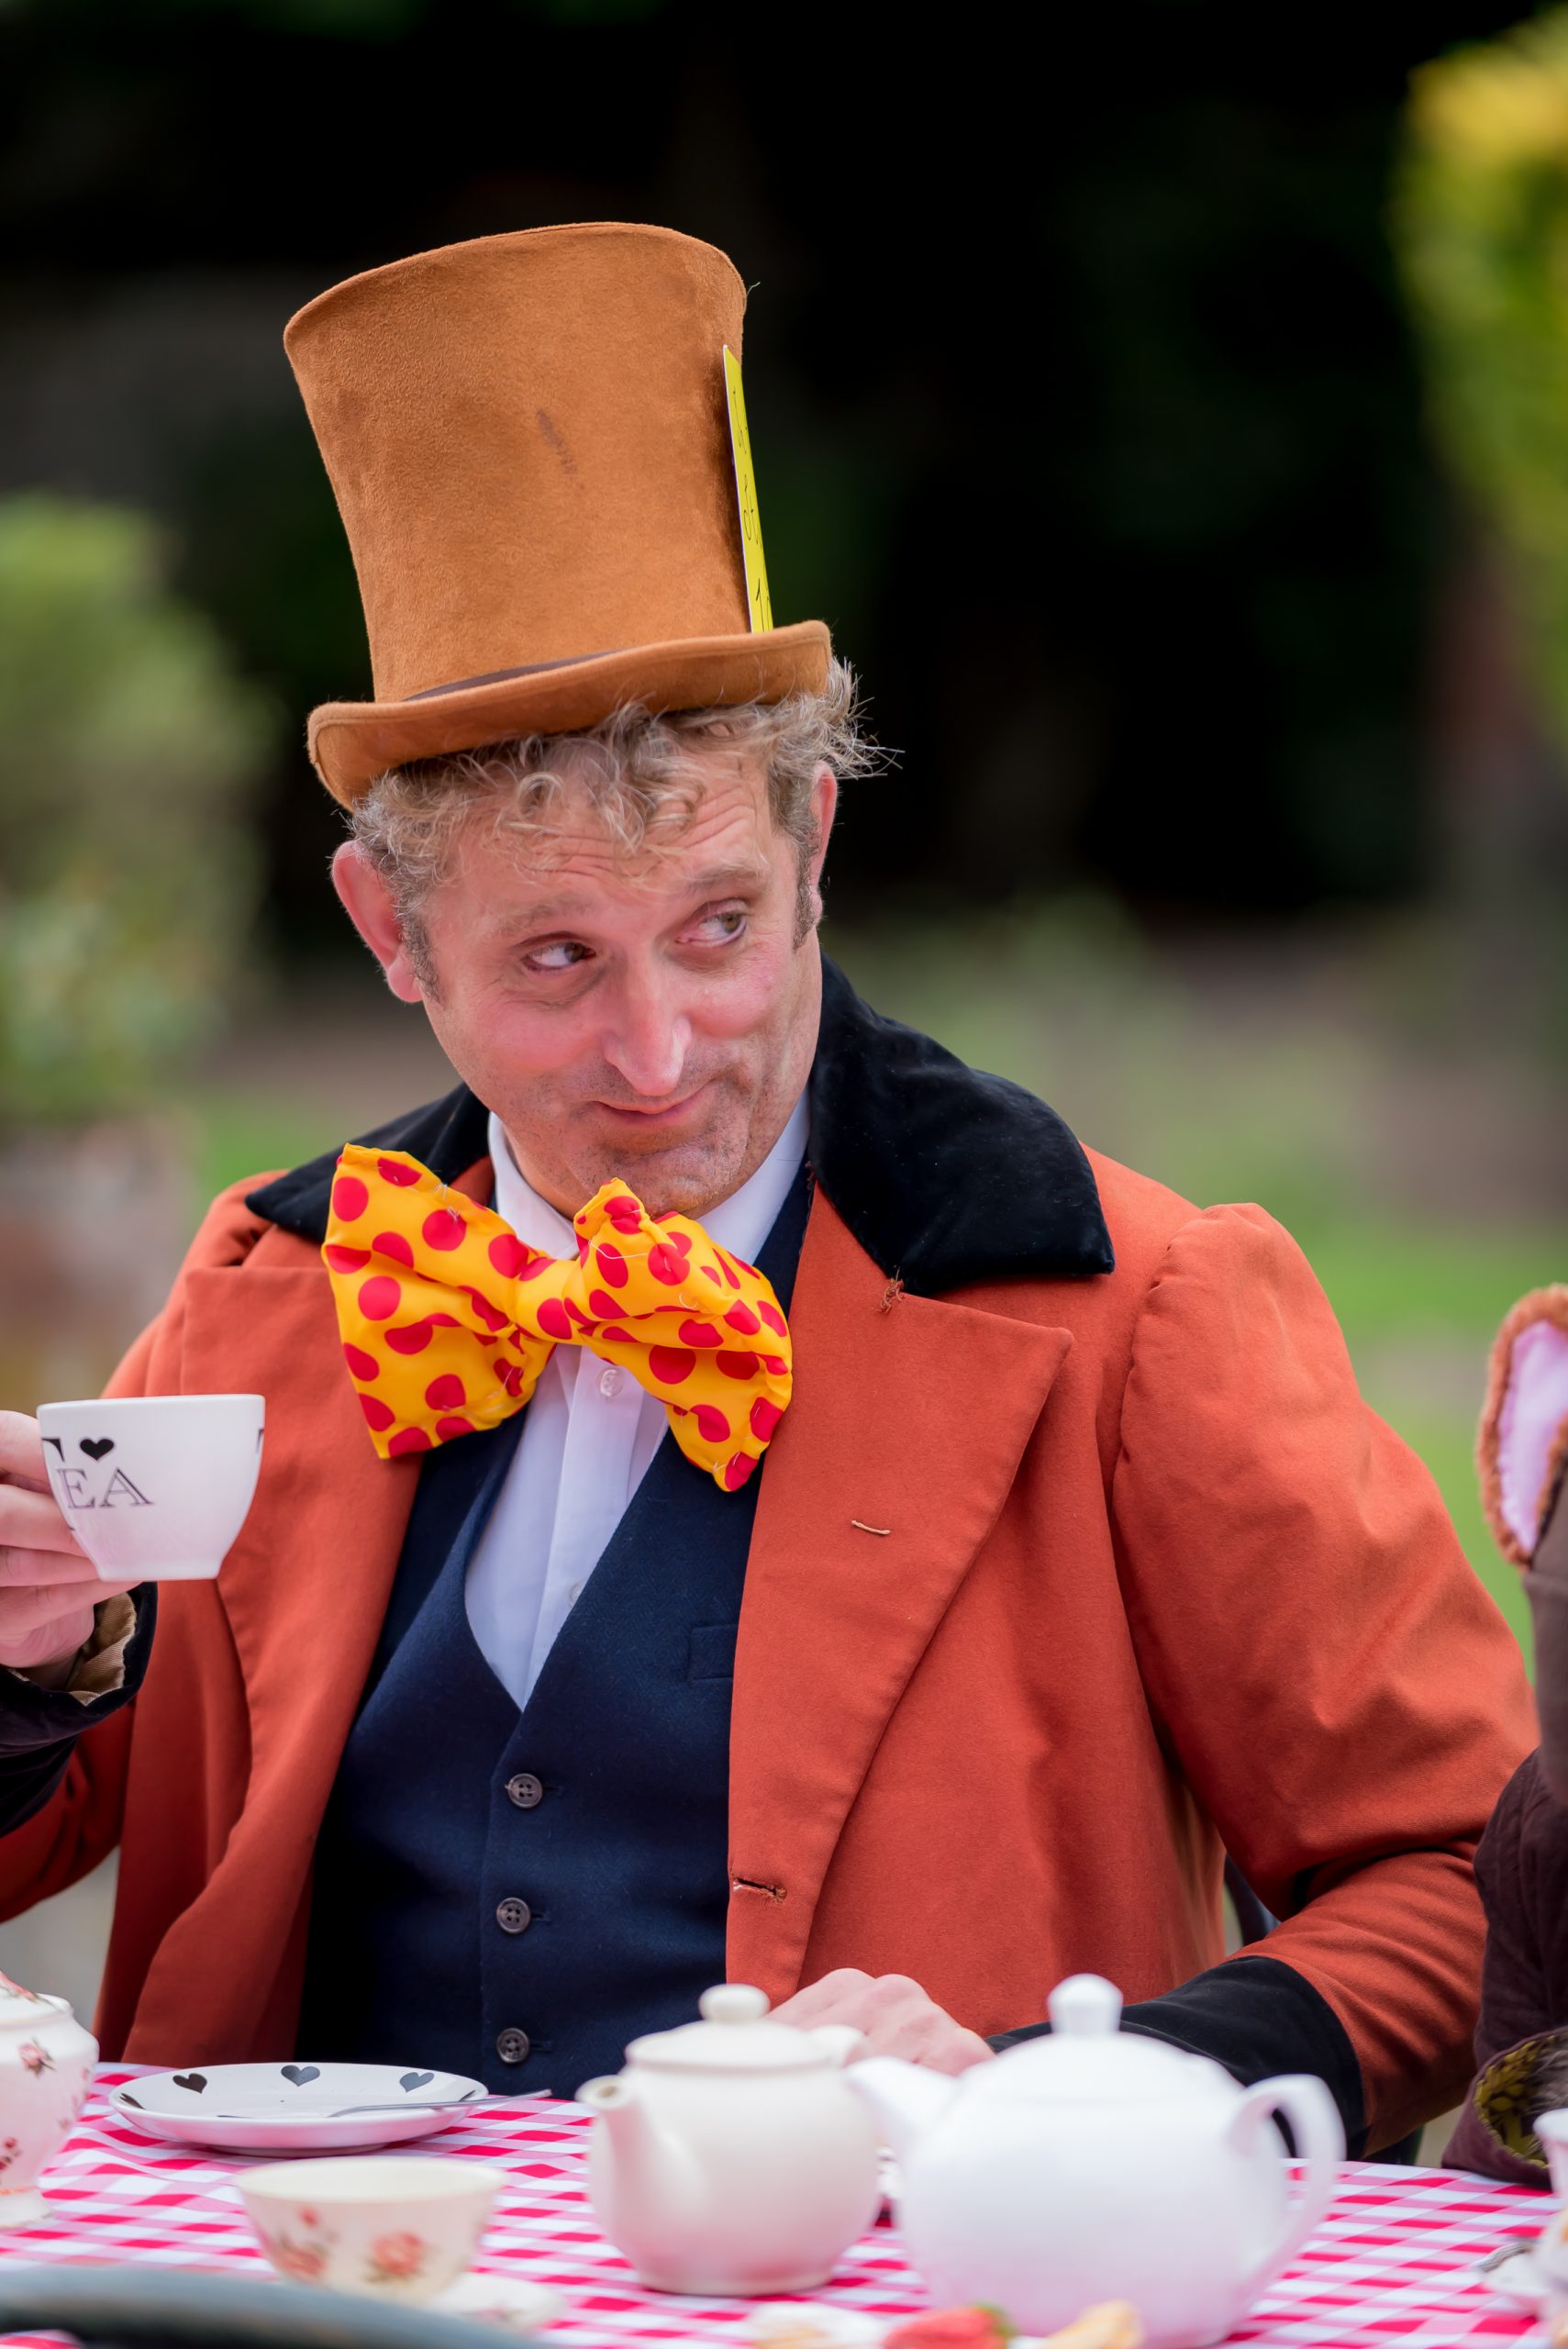 Our director Craig as the Mad Hatter in Alice in Wonderland performed in King's Gardens Thetford